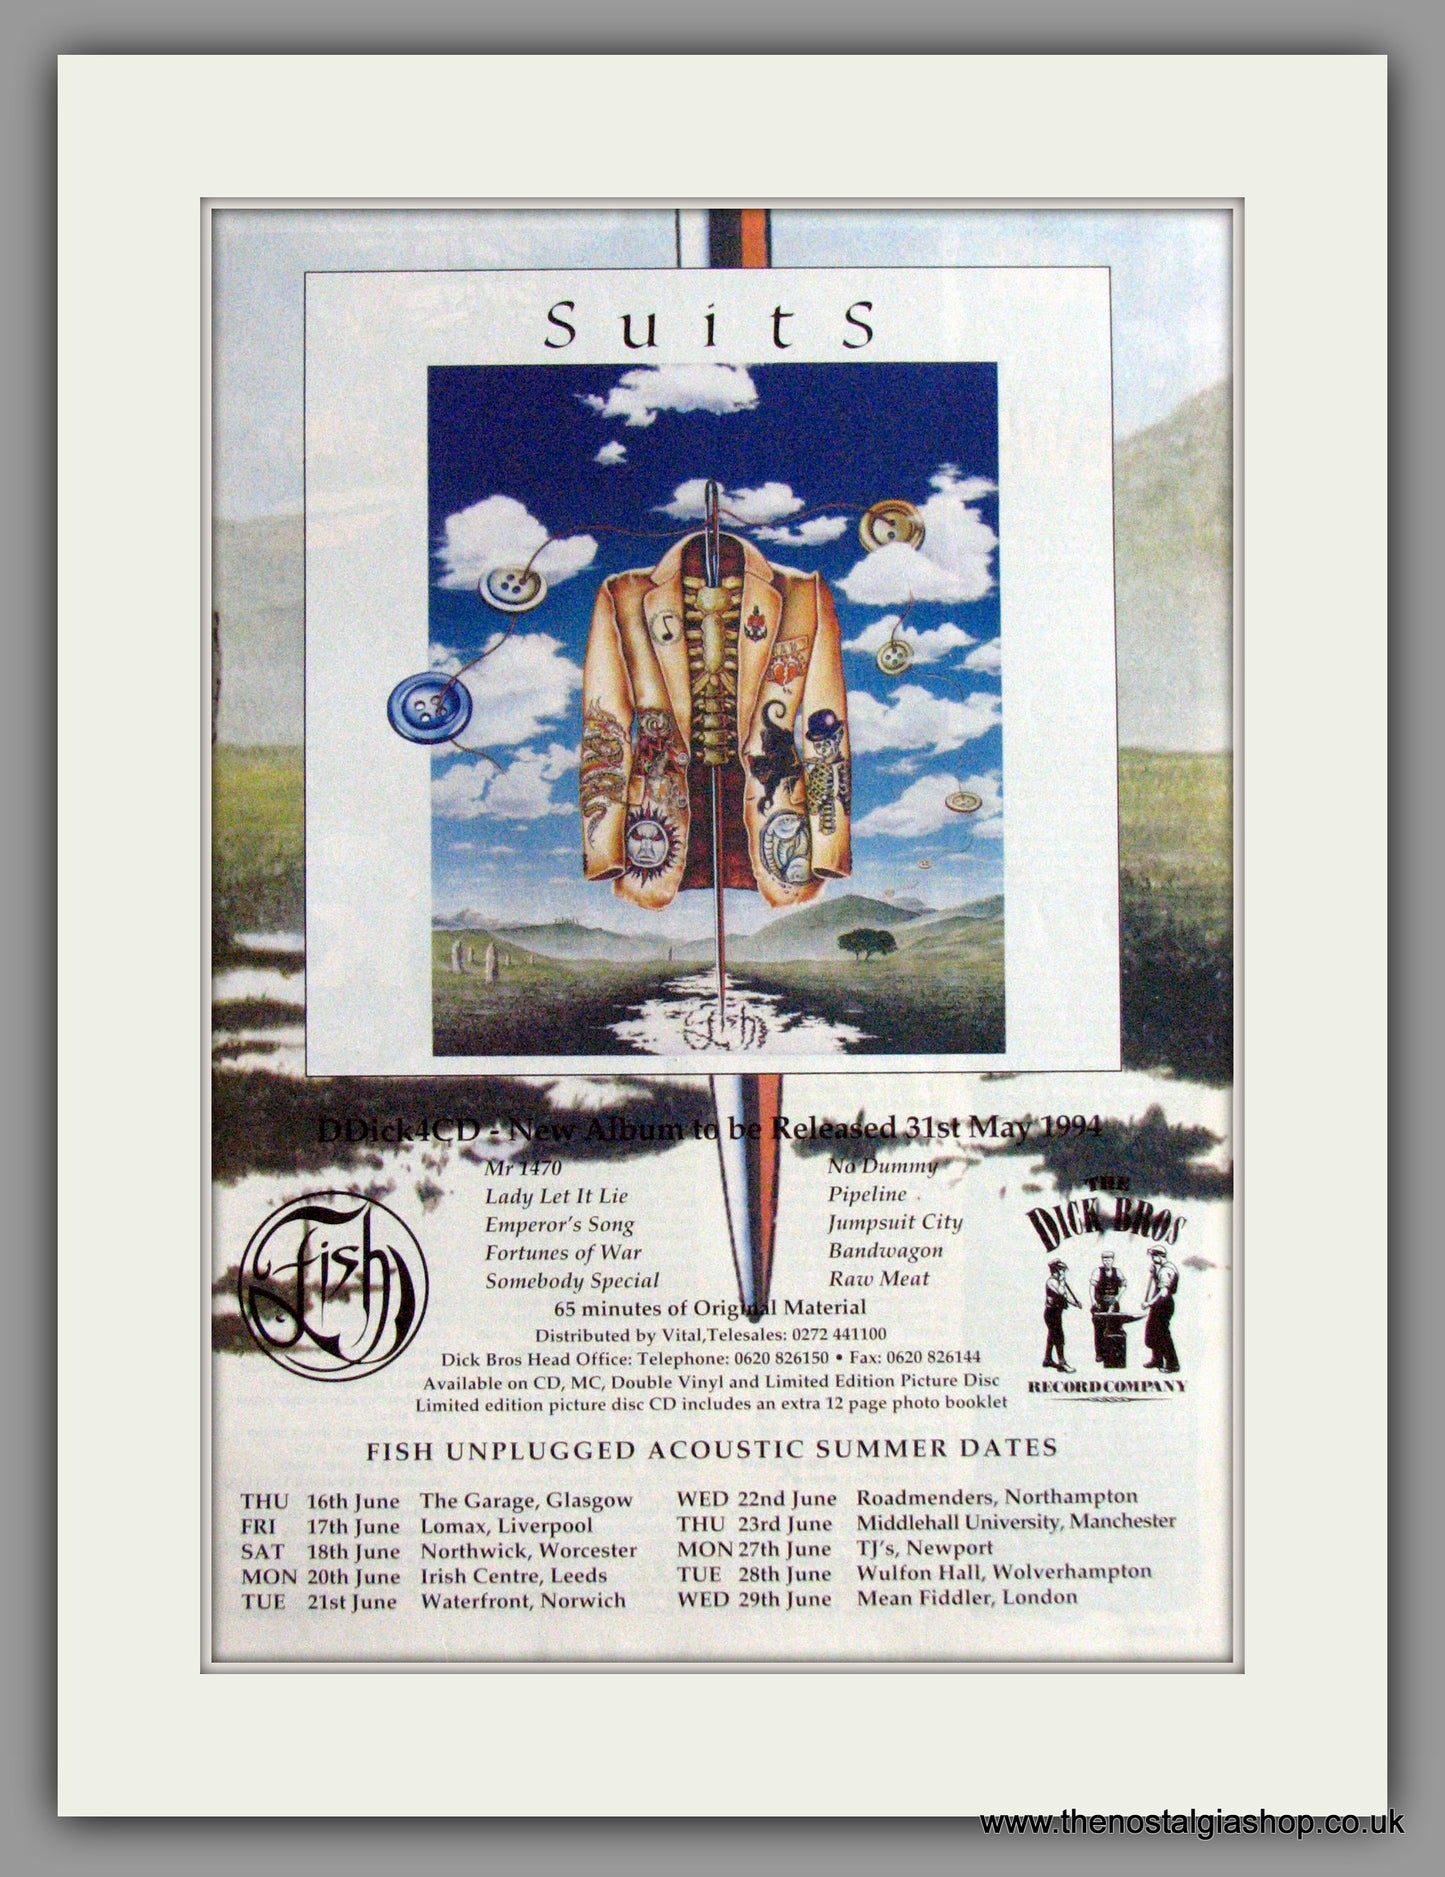 Fish - Suits With Acoustic Summer Dates. Original Advert 1994 (ref AD50279)